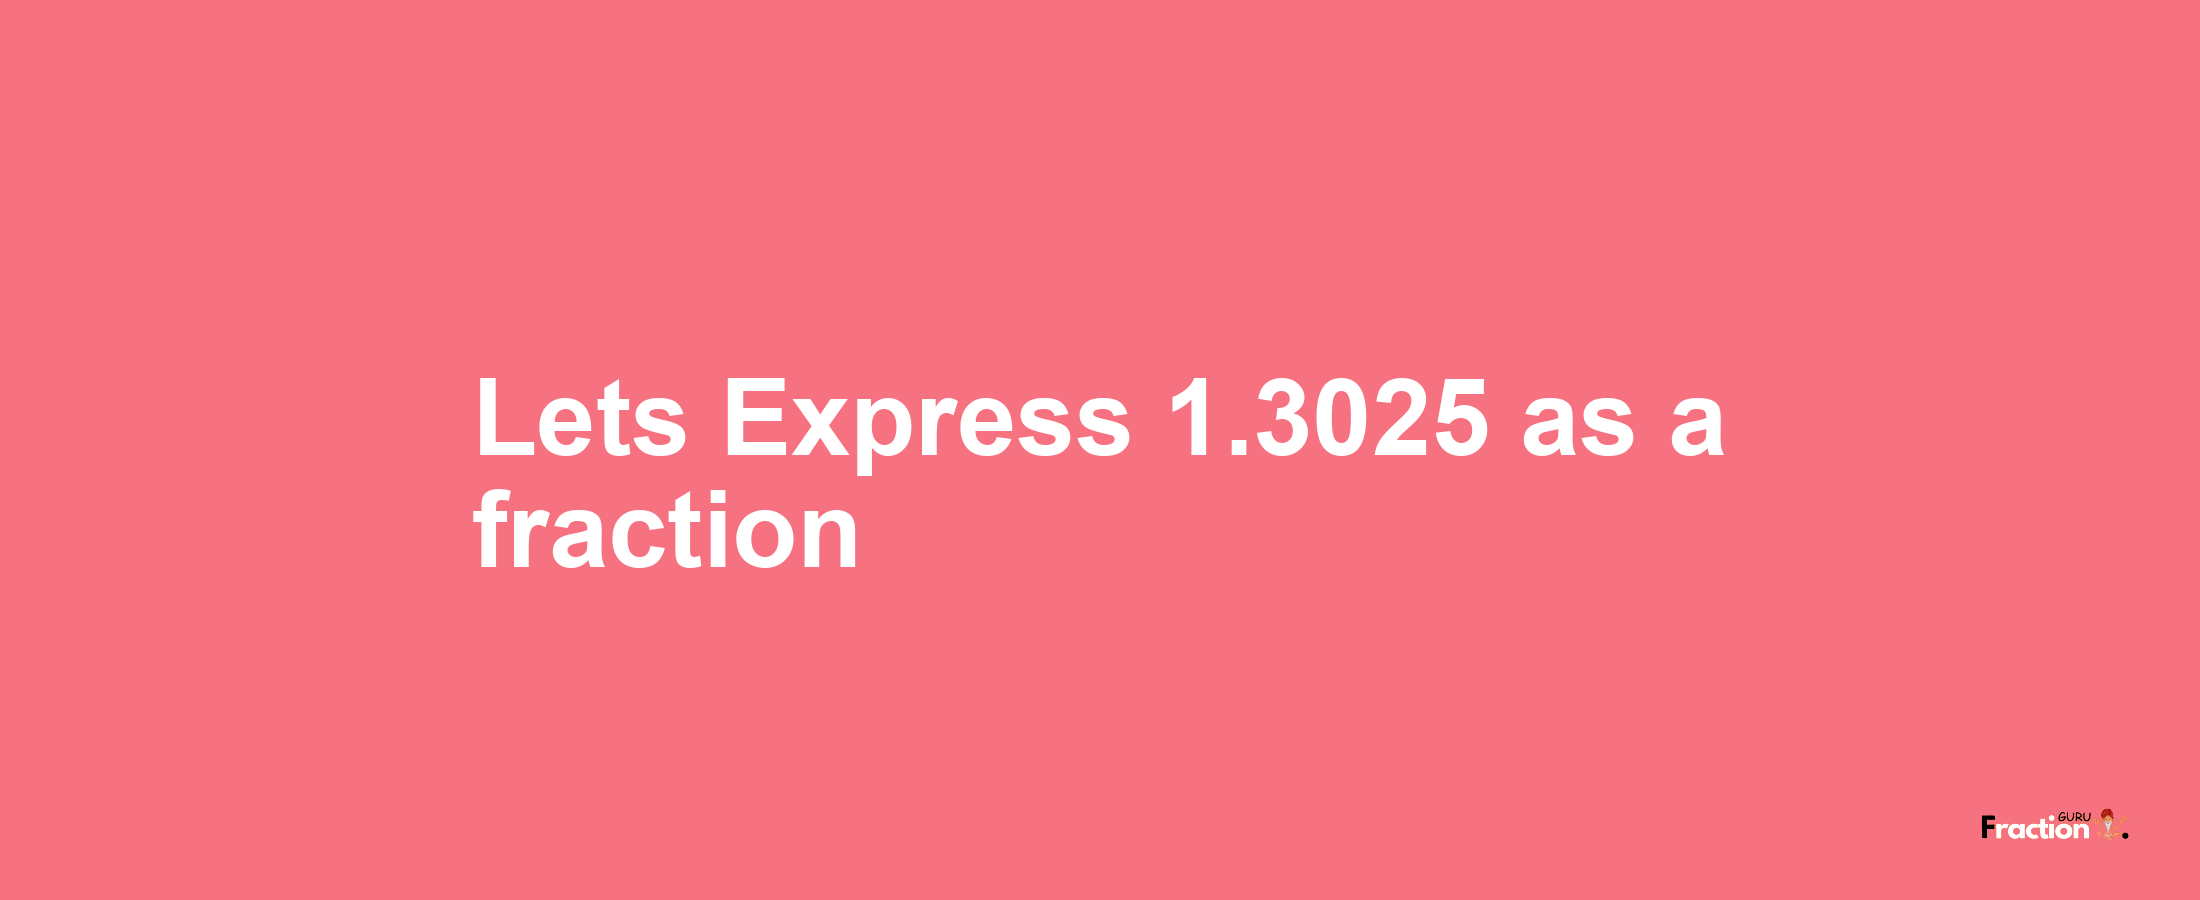 Lets Express 1.3025 as afraction